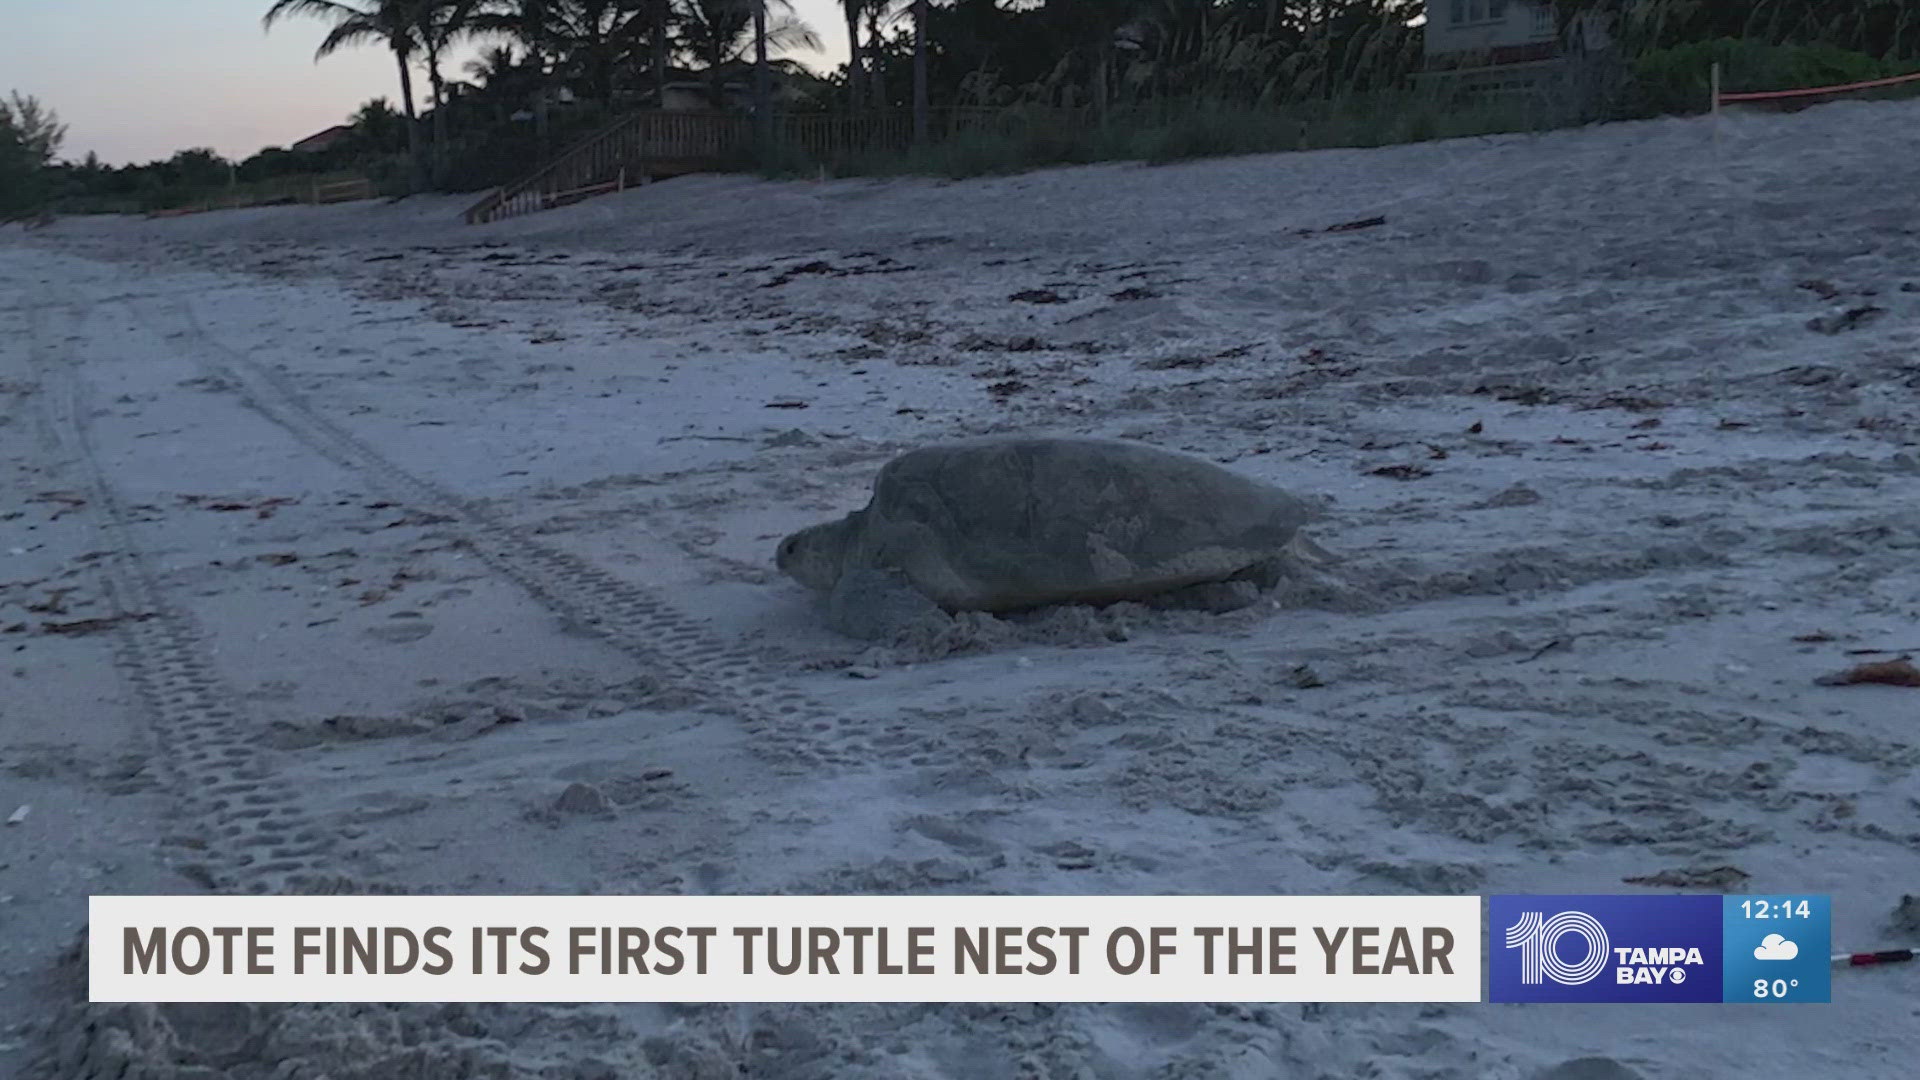 Sea turtle nesting season allows researchers to understand sea turtles’ behavior better, from common to rare species.